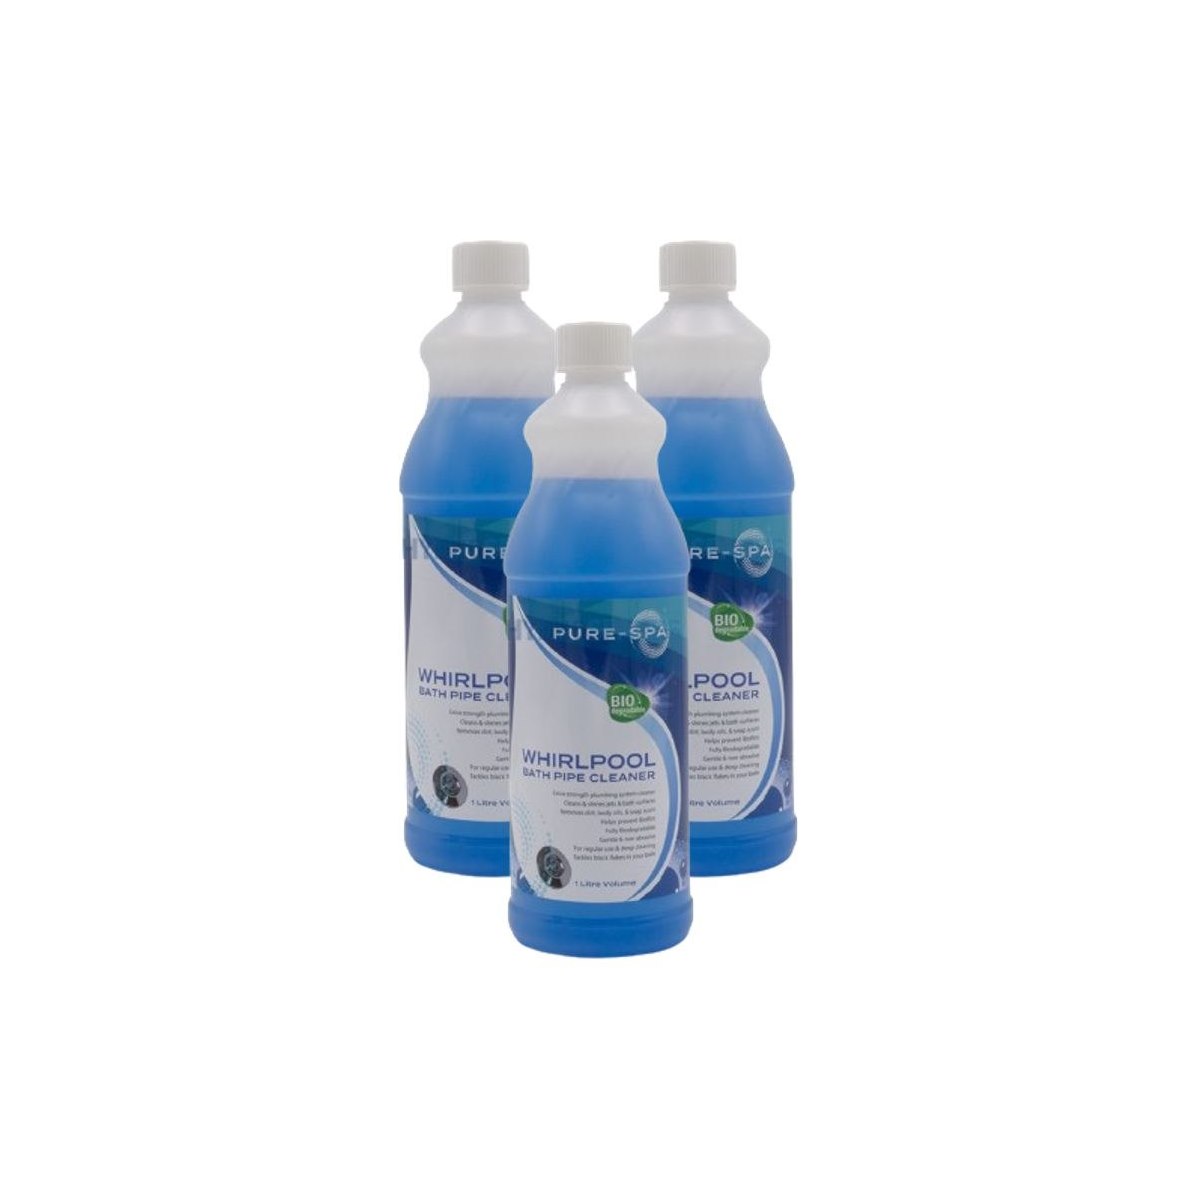 Pack of 3 x Pure Spa Whirlpool Cleaner and Degreaser 1 Litre